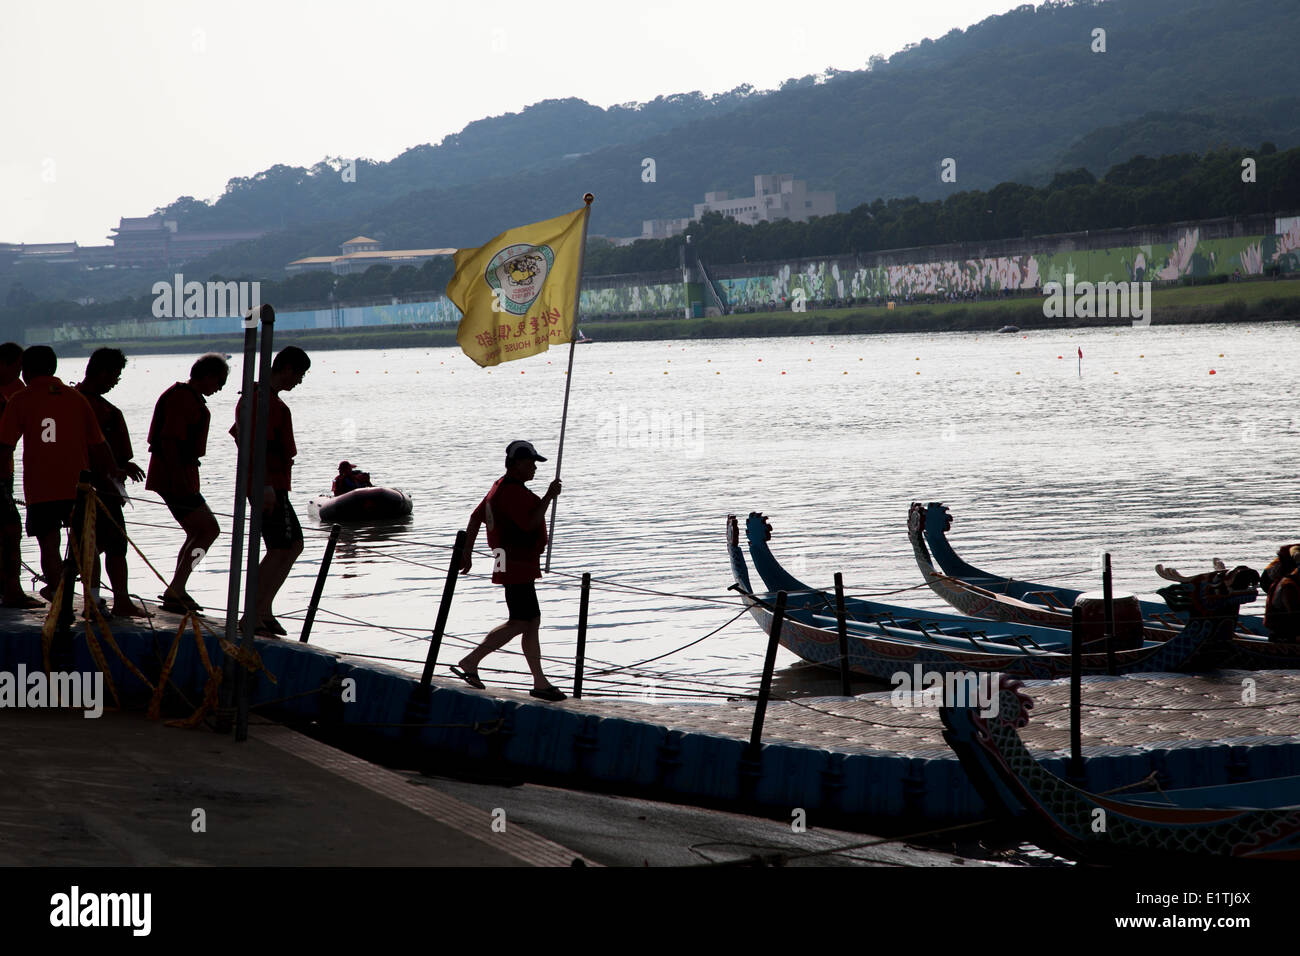 Members of a dragon boat race team head to their boat for the start at the annual Dragon Boat Festival in Taipei, Taiwan, Saturday, May 31, 2014. Dragon boat races are held across the Southeast Asia for more than 2000 years to remember Qu Yuan, an ancient Stock Photo